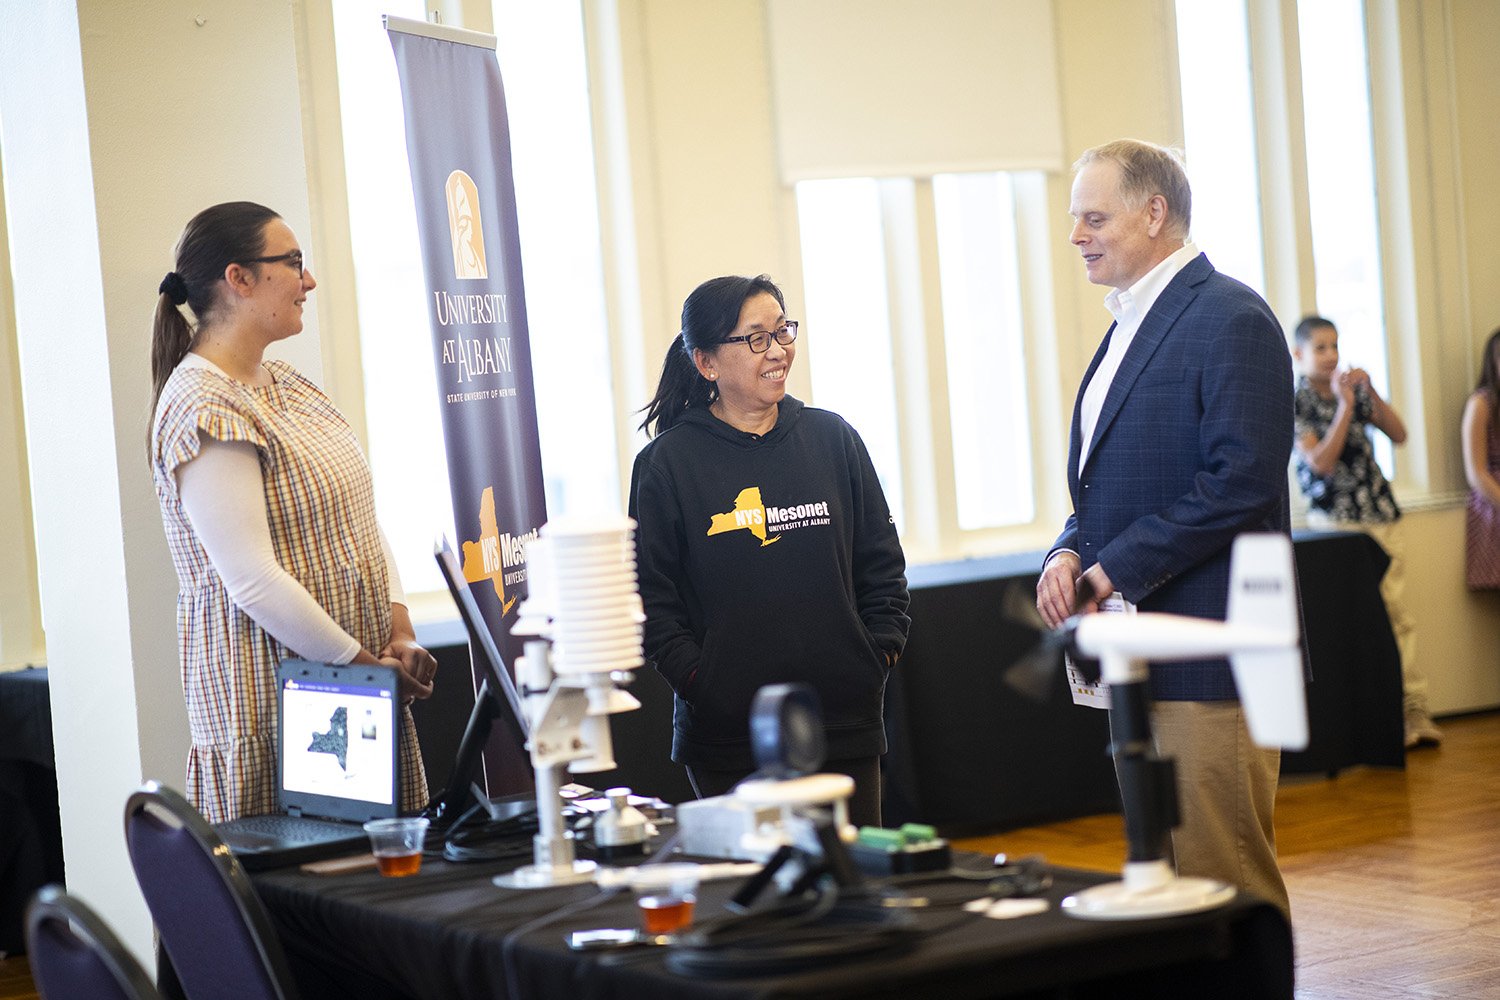 Researchers from the New York State Mesonet talk with ASRC Research Associate Scott Miller at the senior faculty recognition event.